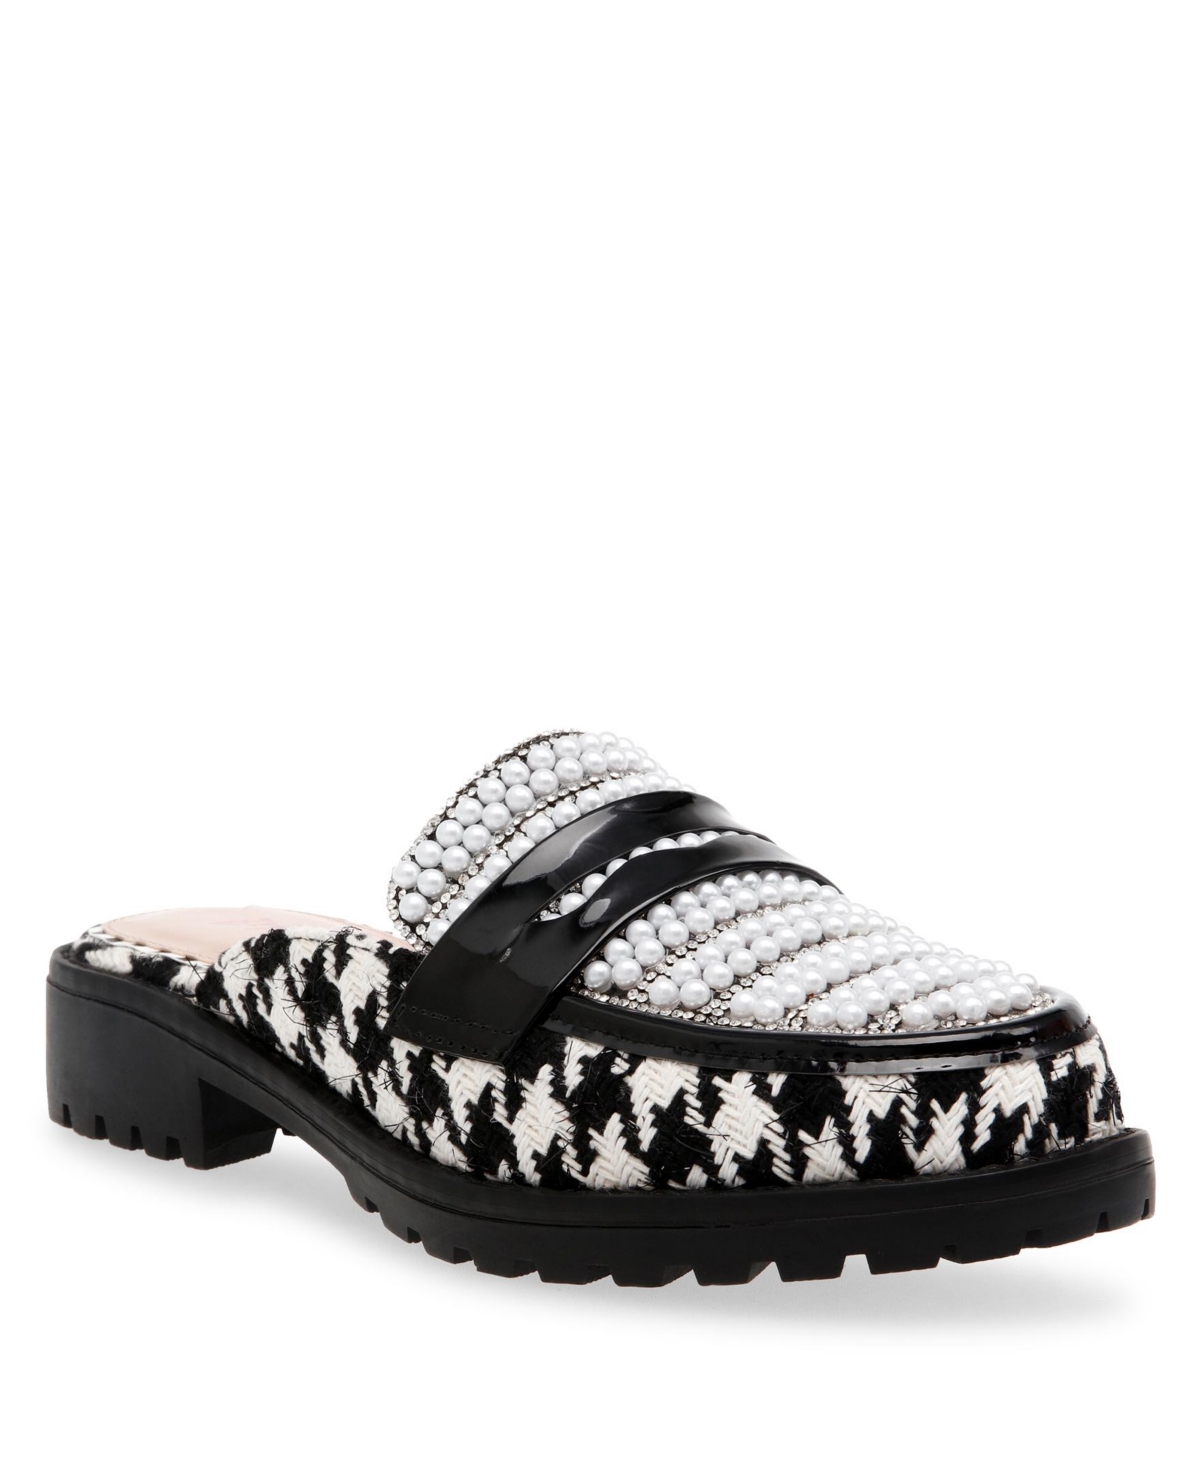 Women's Ronin Plaid and Rhinestone Embellished Mule Loafer - Houndstooth